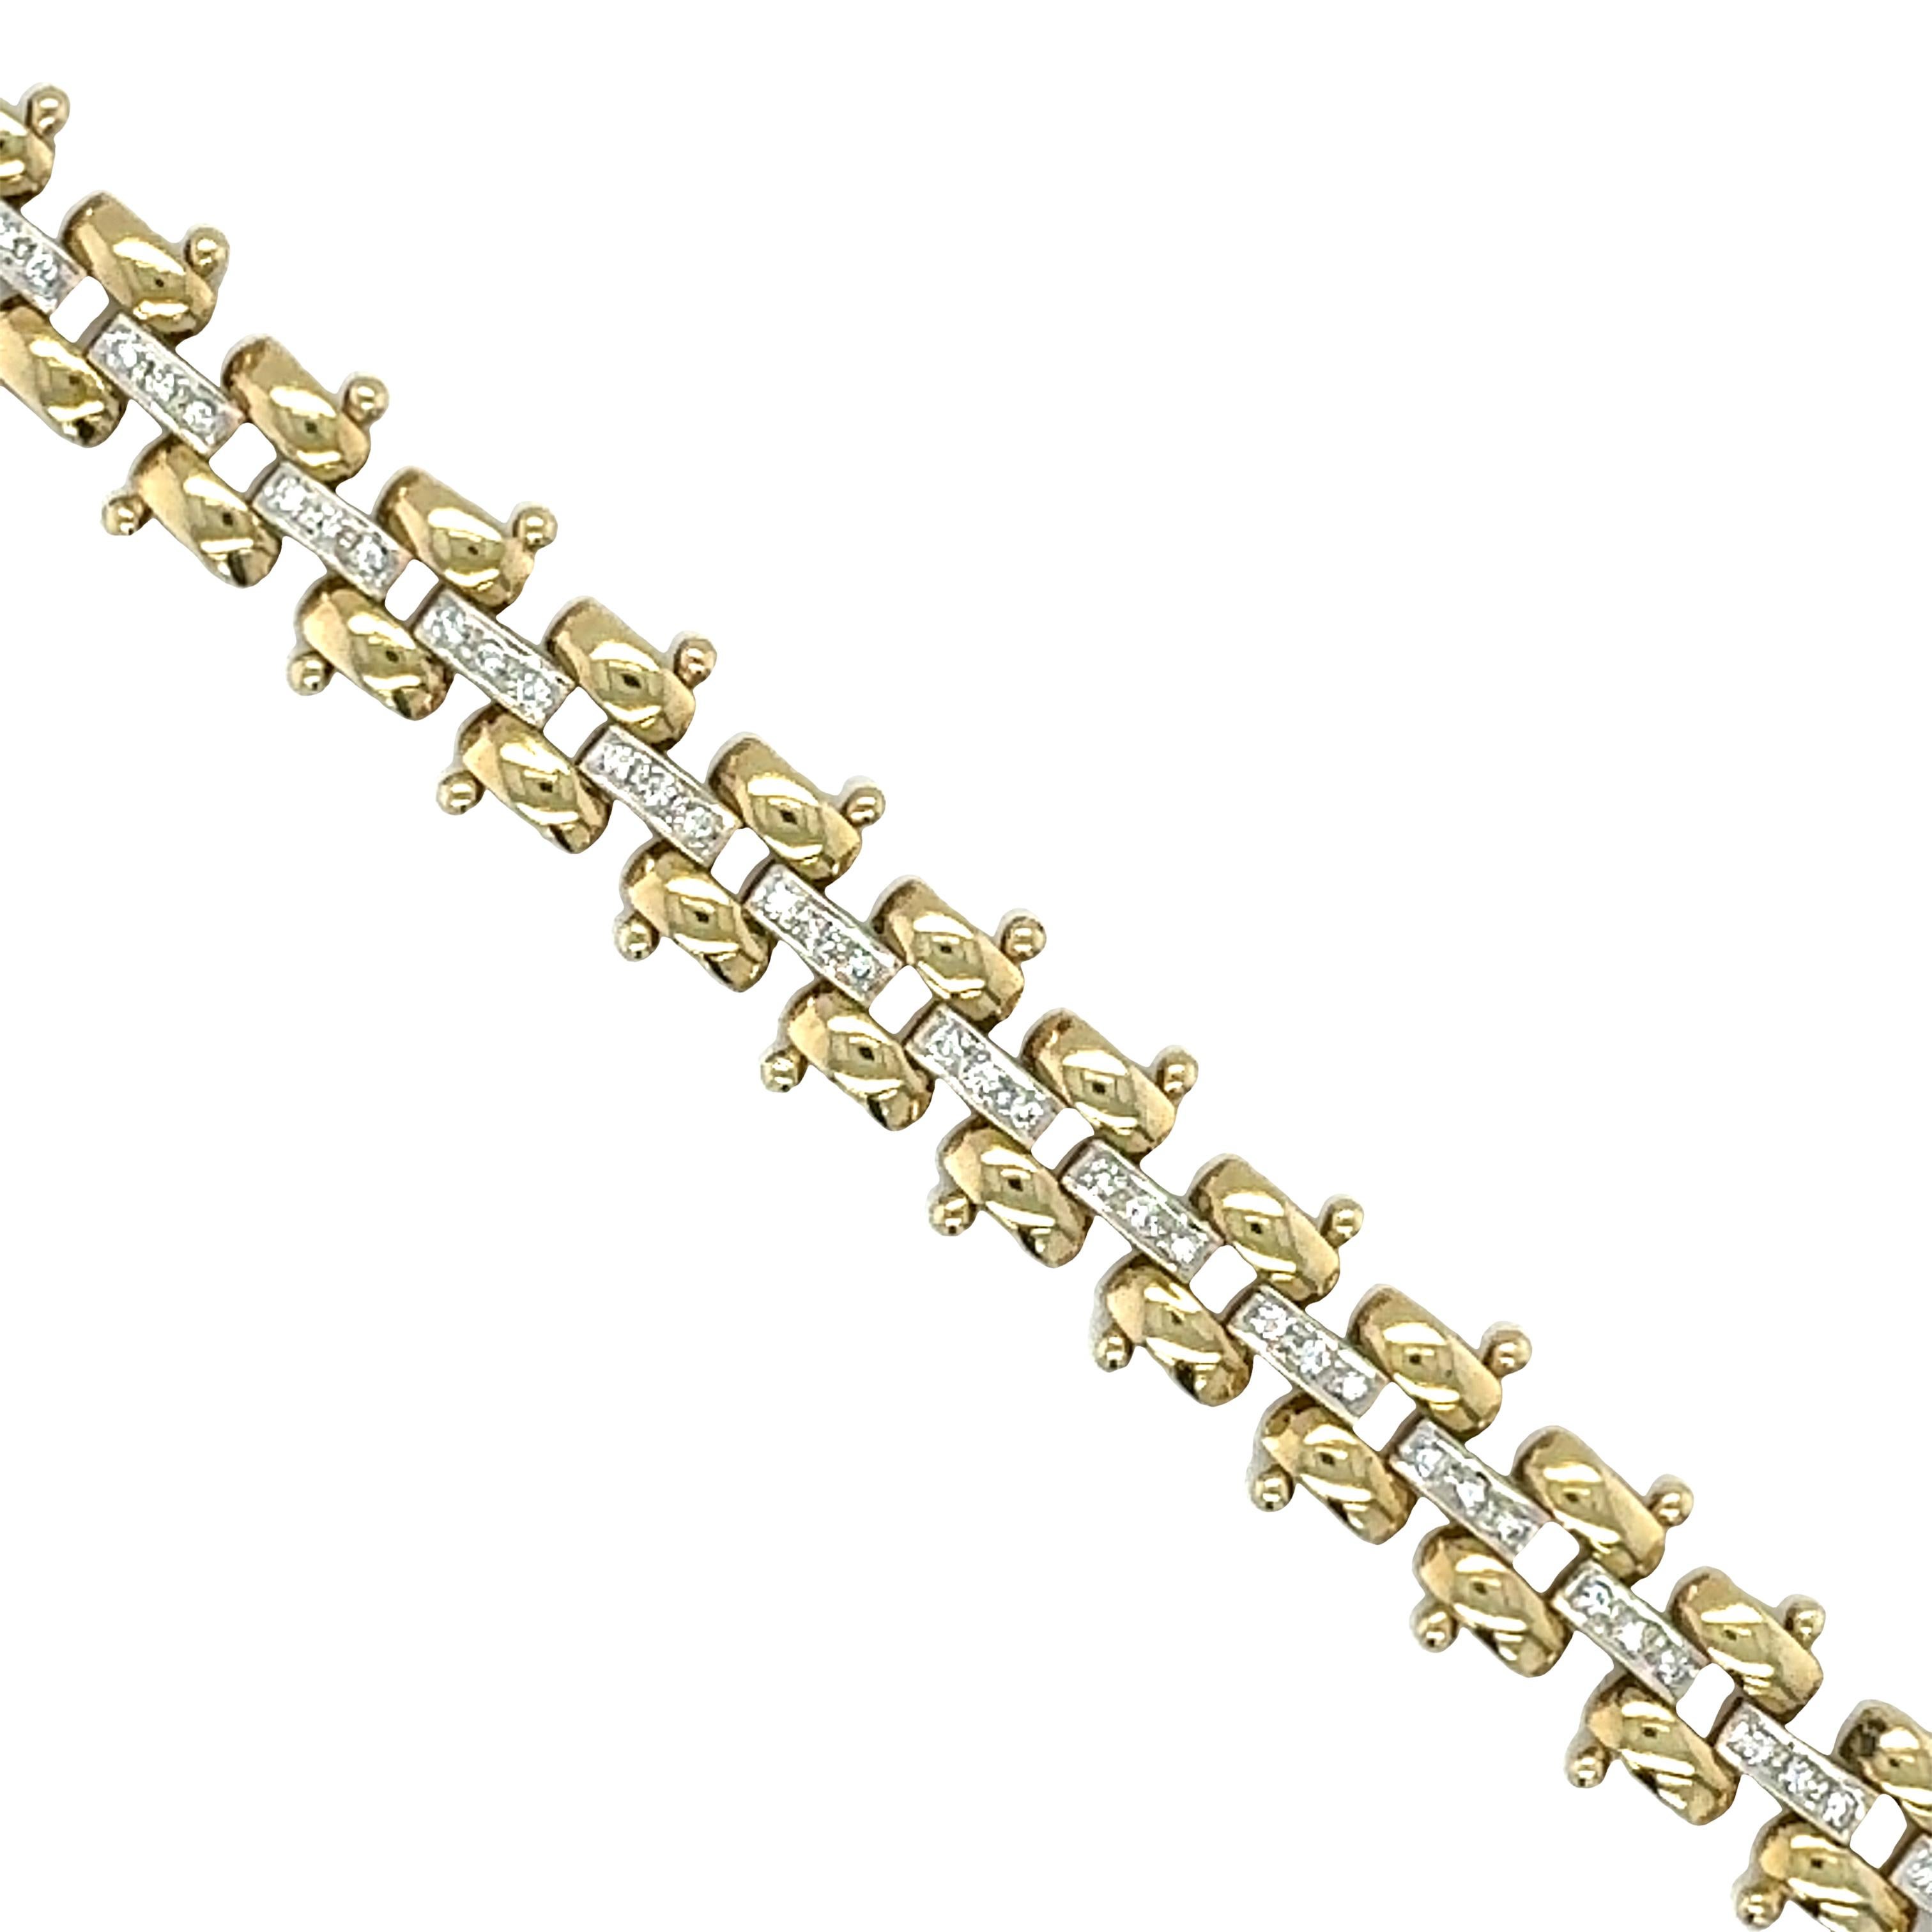 One 14K yellow and white gold diamond link bracelet featuring 60 pave-set, round brilliant cut diamonds totaling 0.94 ct. with I-J color and SI-1 clarity. With safety clasp.

Metal: 14K Yellow and White Gold
Gemstone: Diamonds totaling 0.94 ct., I-J